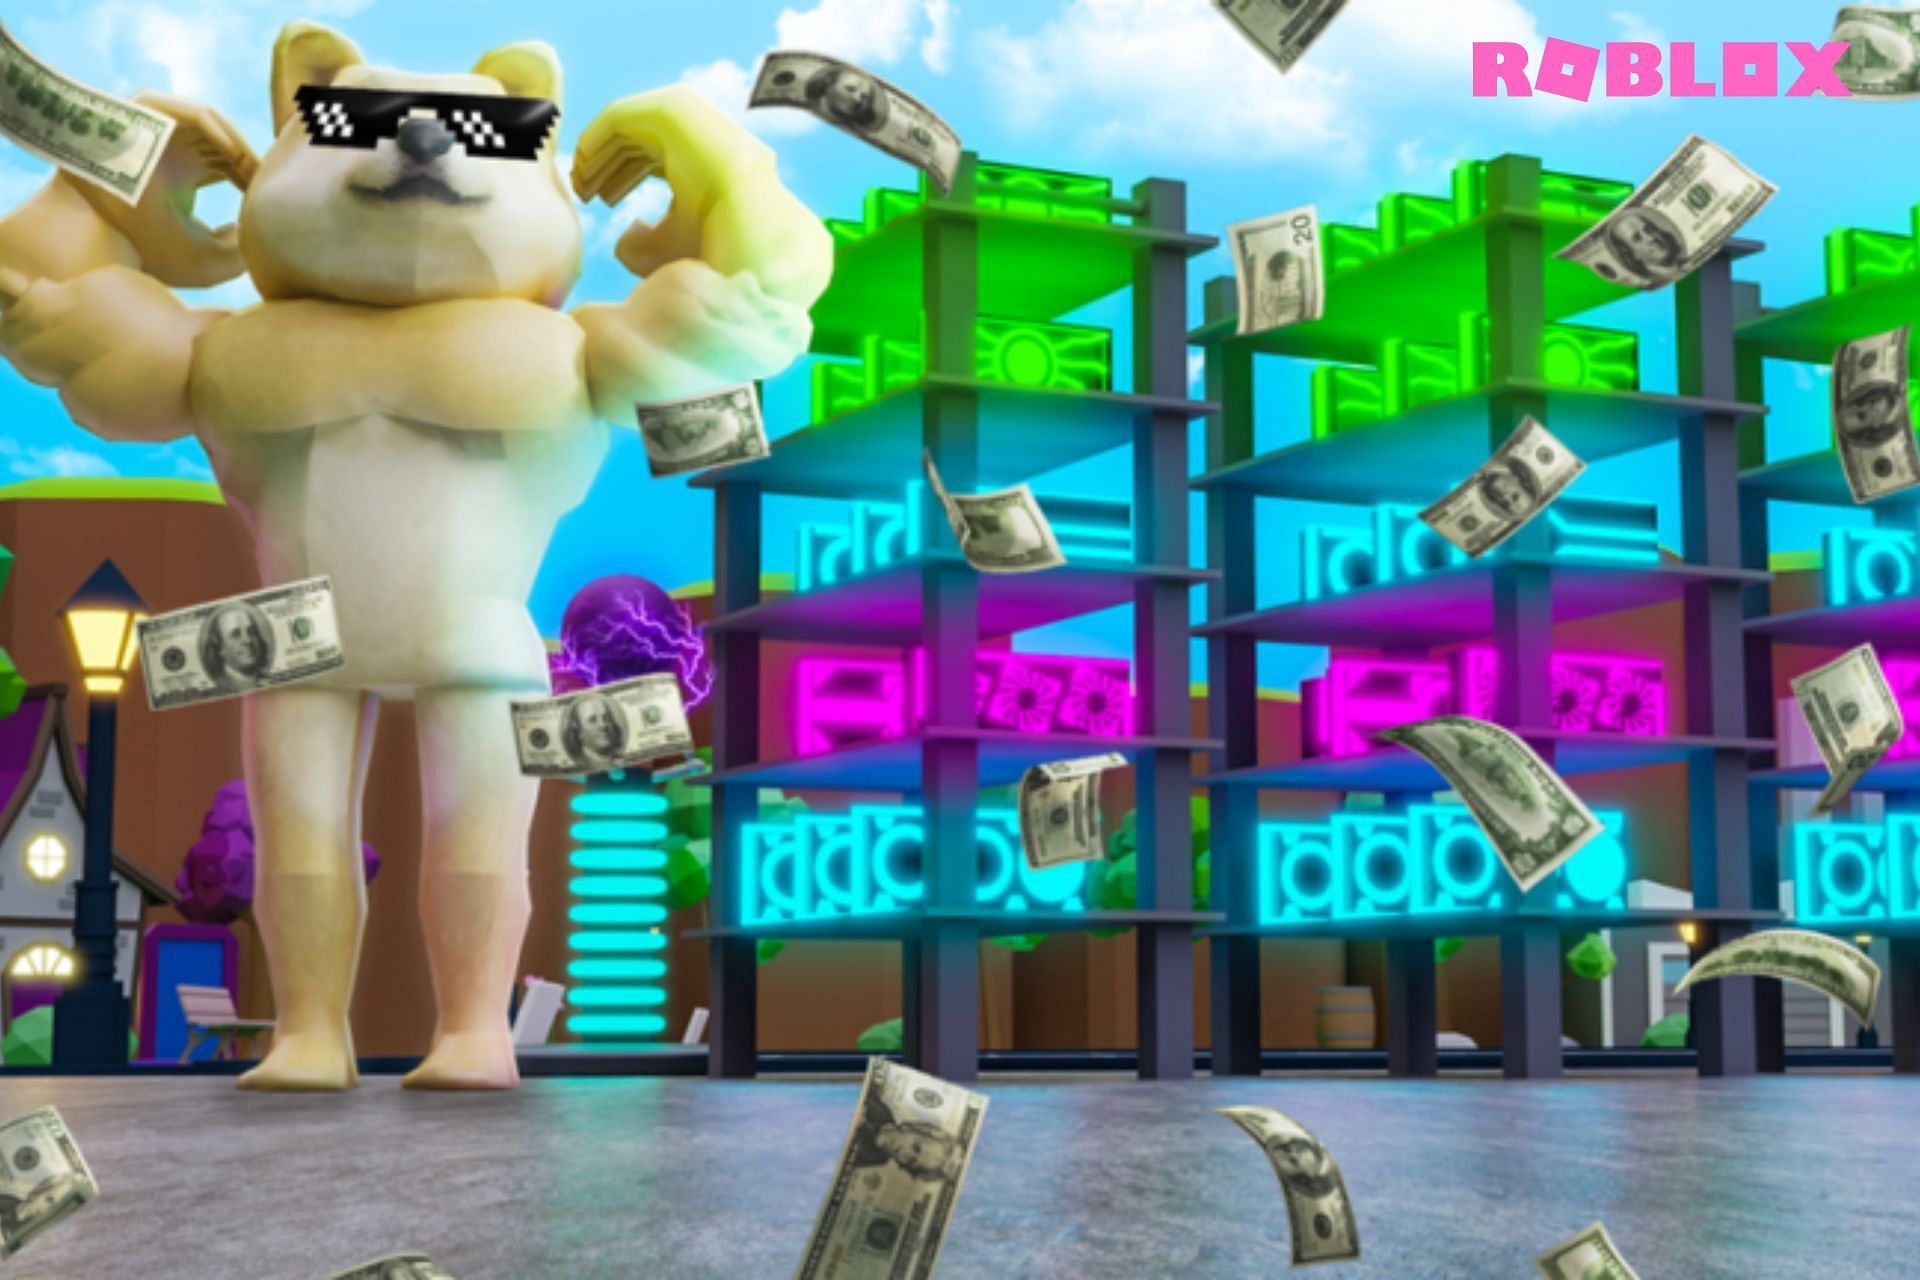 Mine dogecoin to become rich (Image via Roblox)